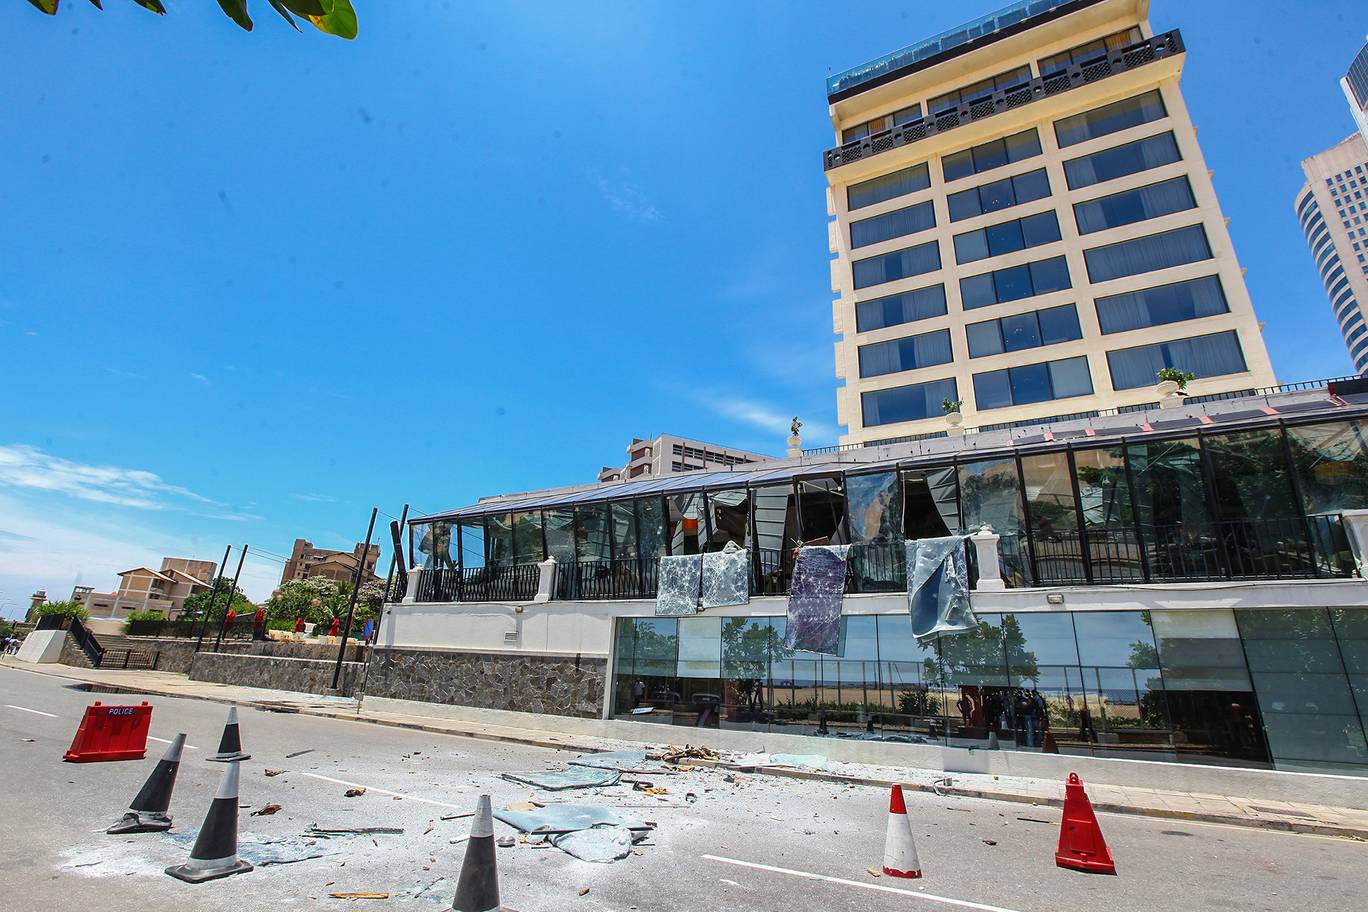 The Kingsbury hotel in Colombo, Sri Lanka after a bombing attack Getty